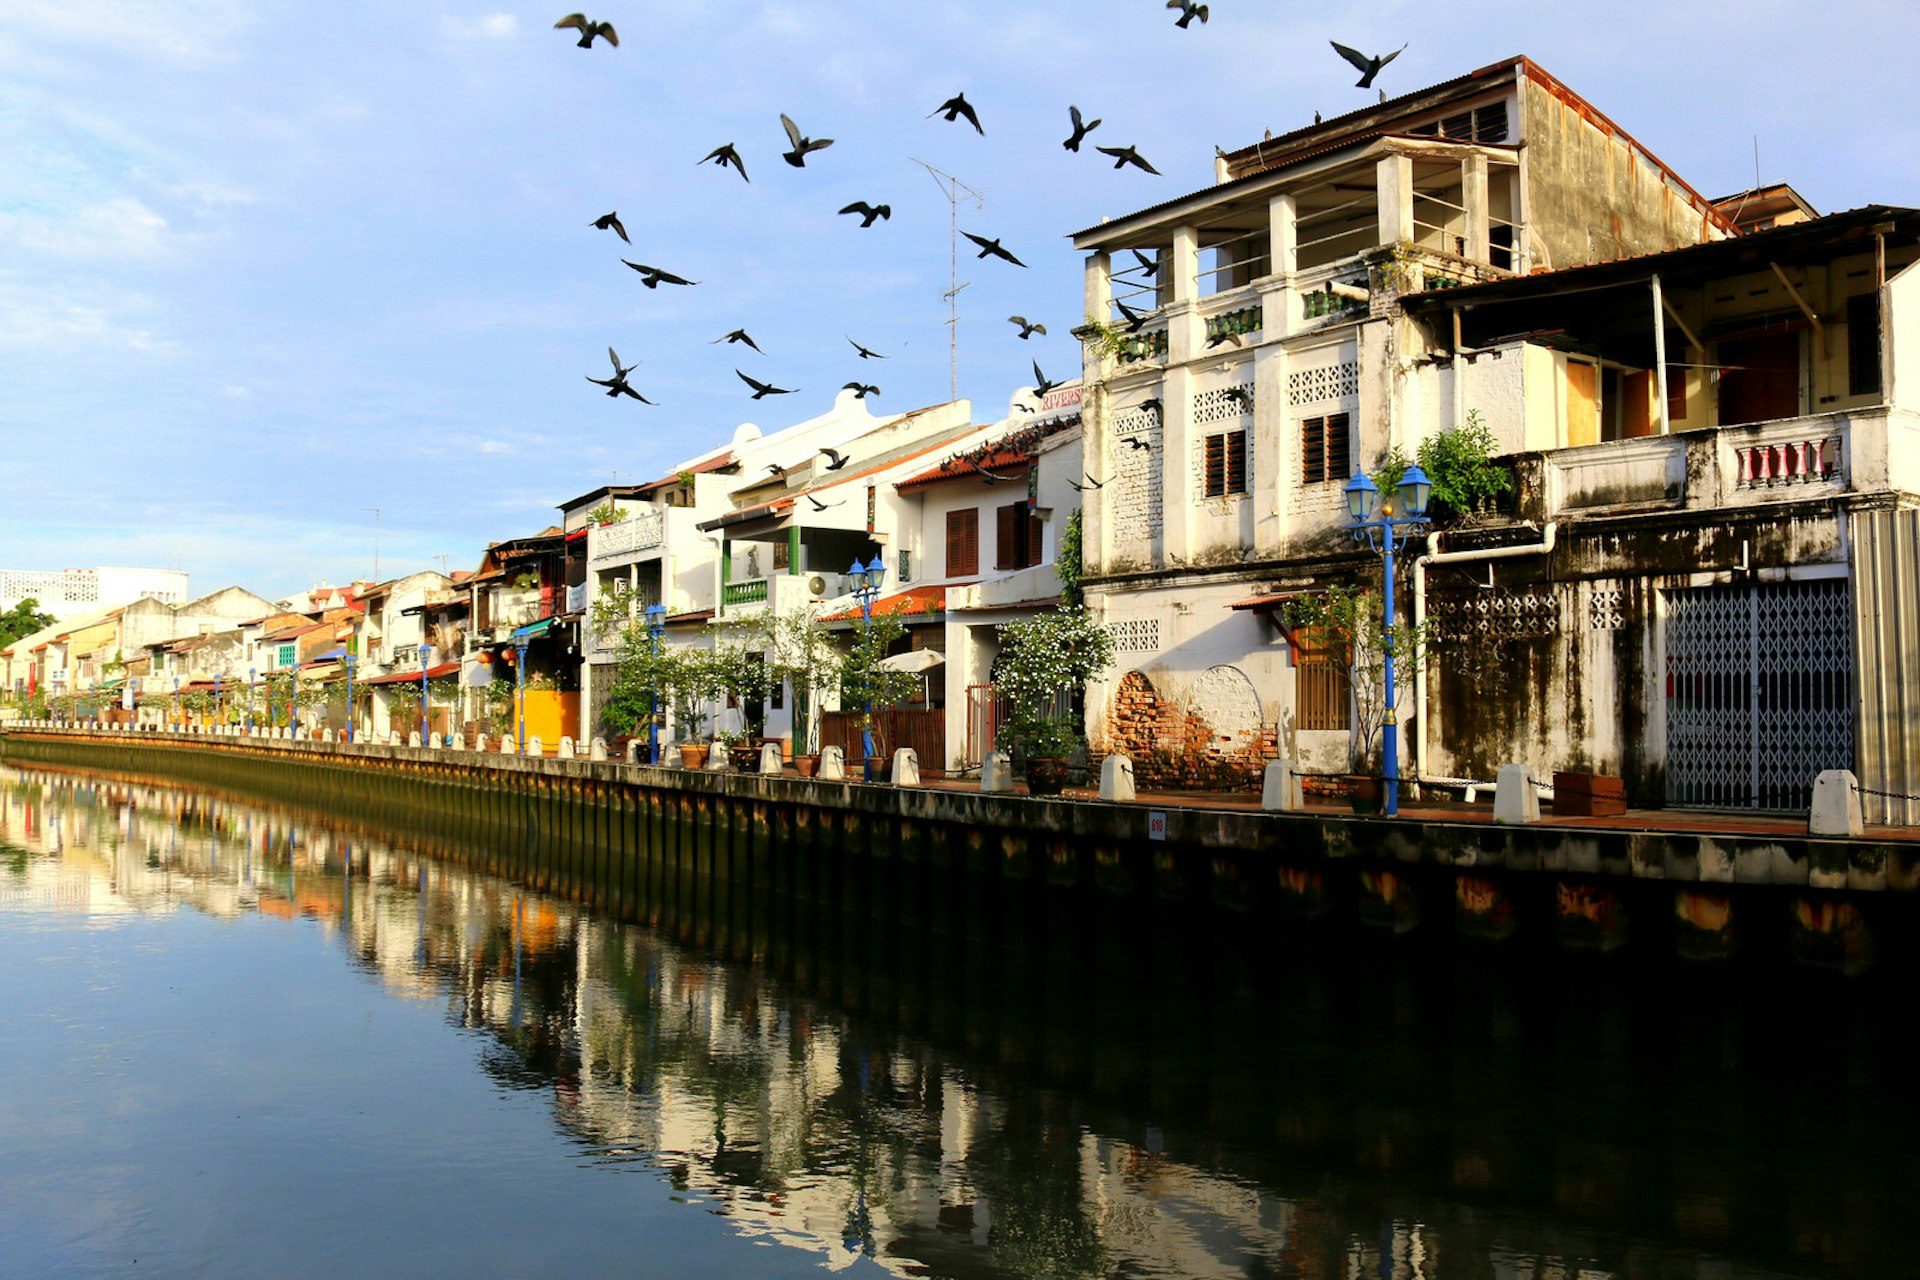 Restaurants and cafes lining the banks of the Melaka River are reflected in the river's still waters © Frans Sellies / Getty Images